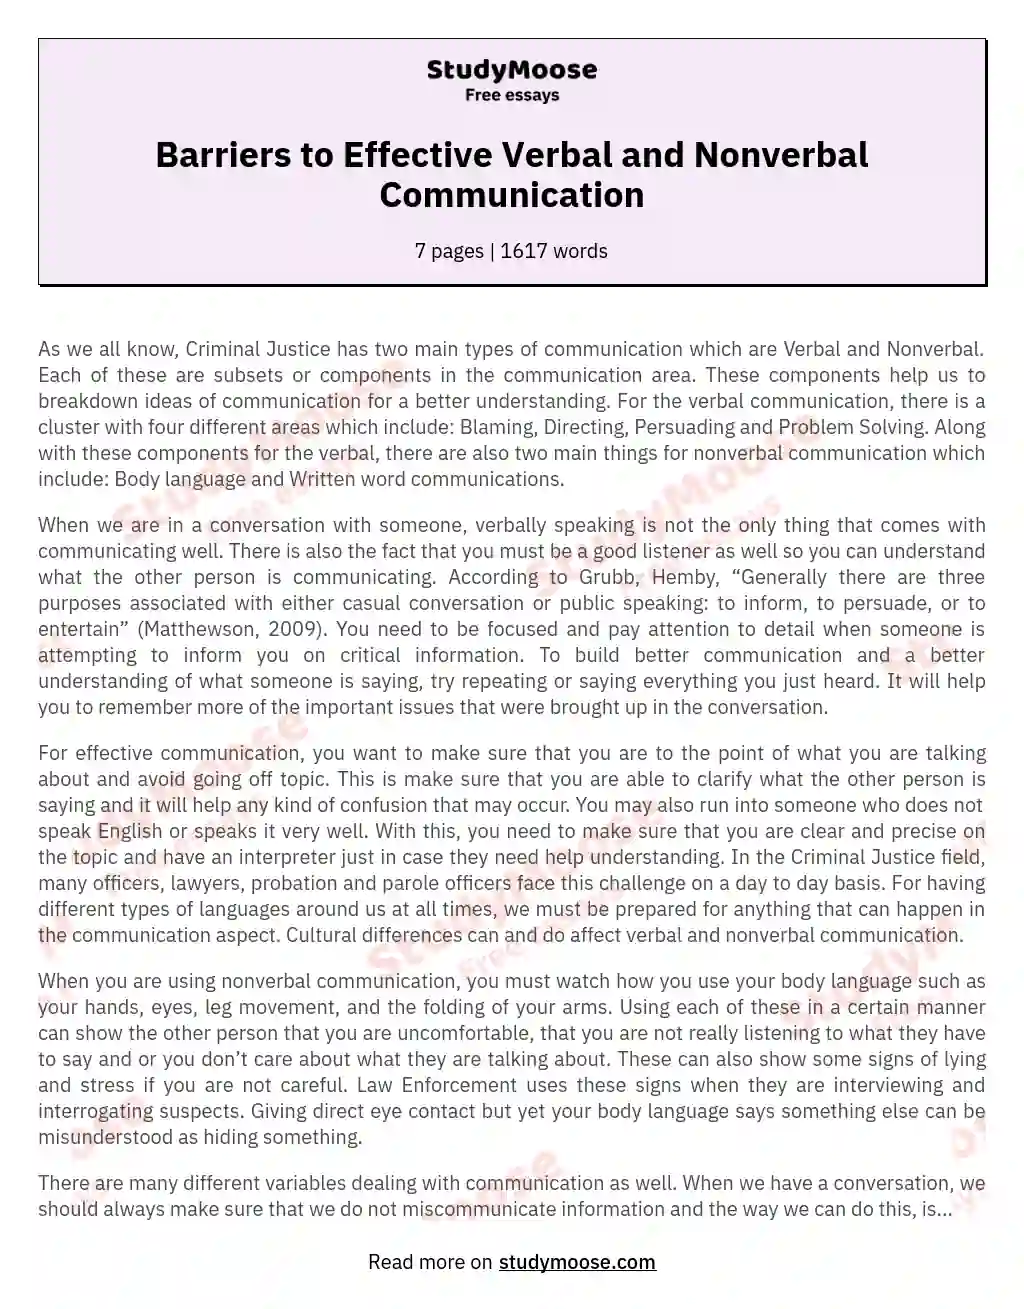 Barriers to Effective Verbal and Nonverbal Communication